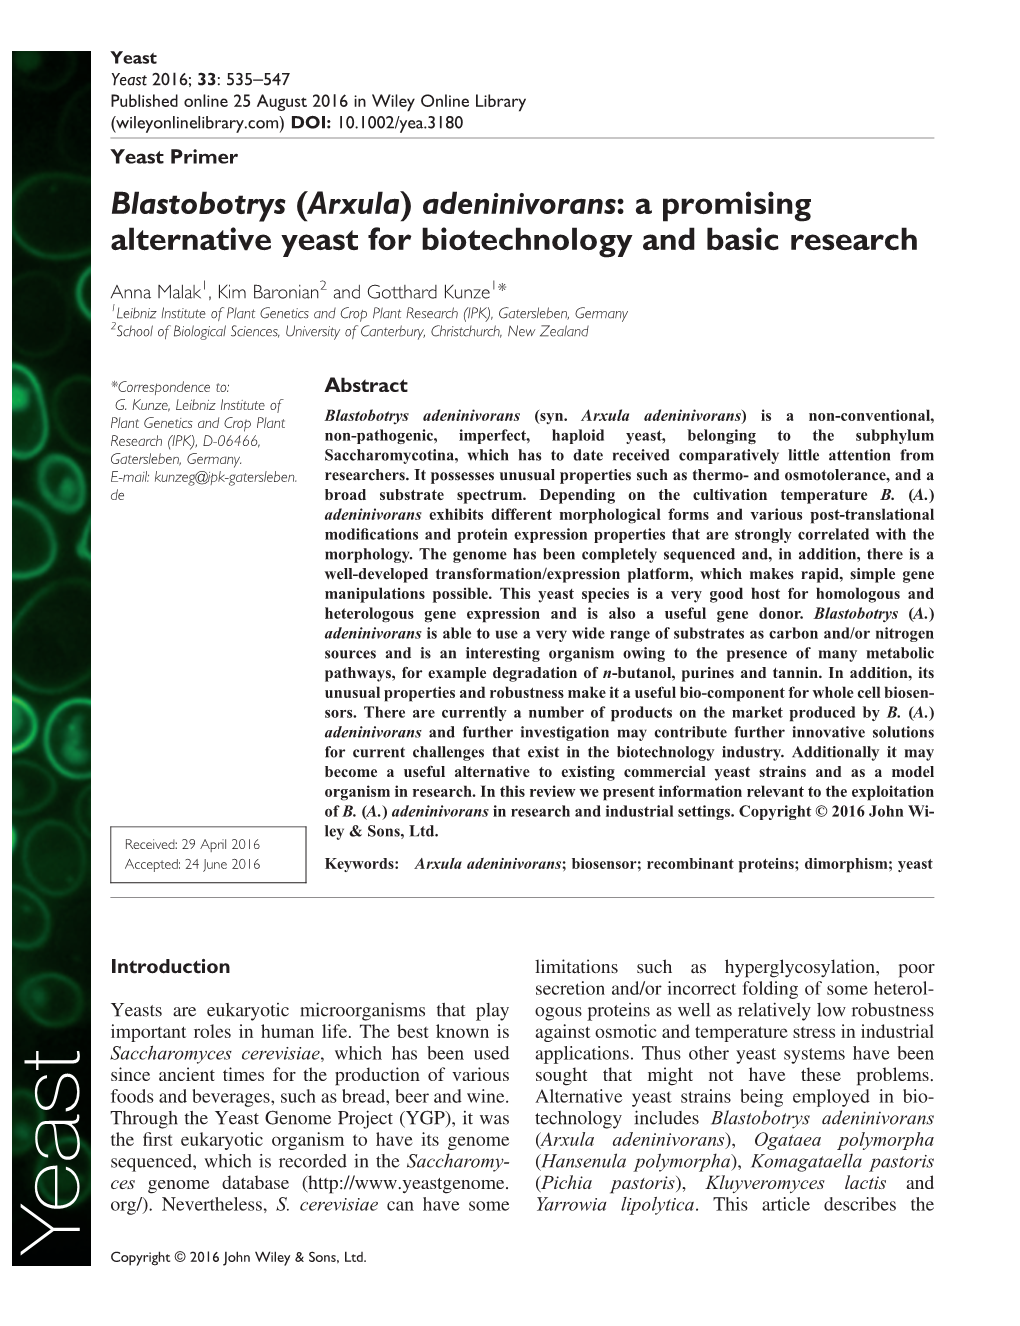 (Arxula) Adeninivorans: a Promising Alternative Yeast for Biotechnology and Basic Research